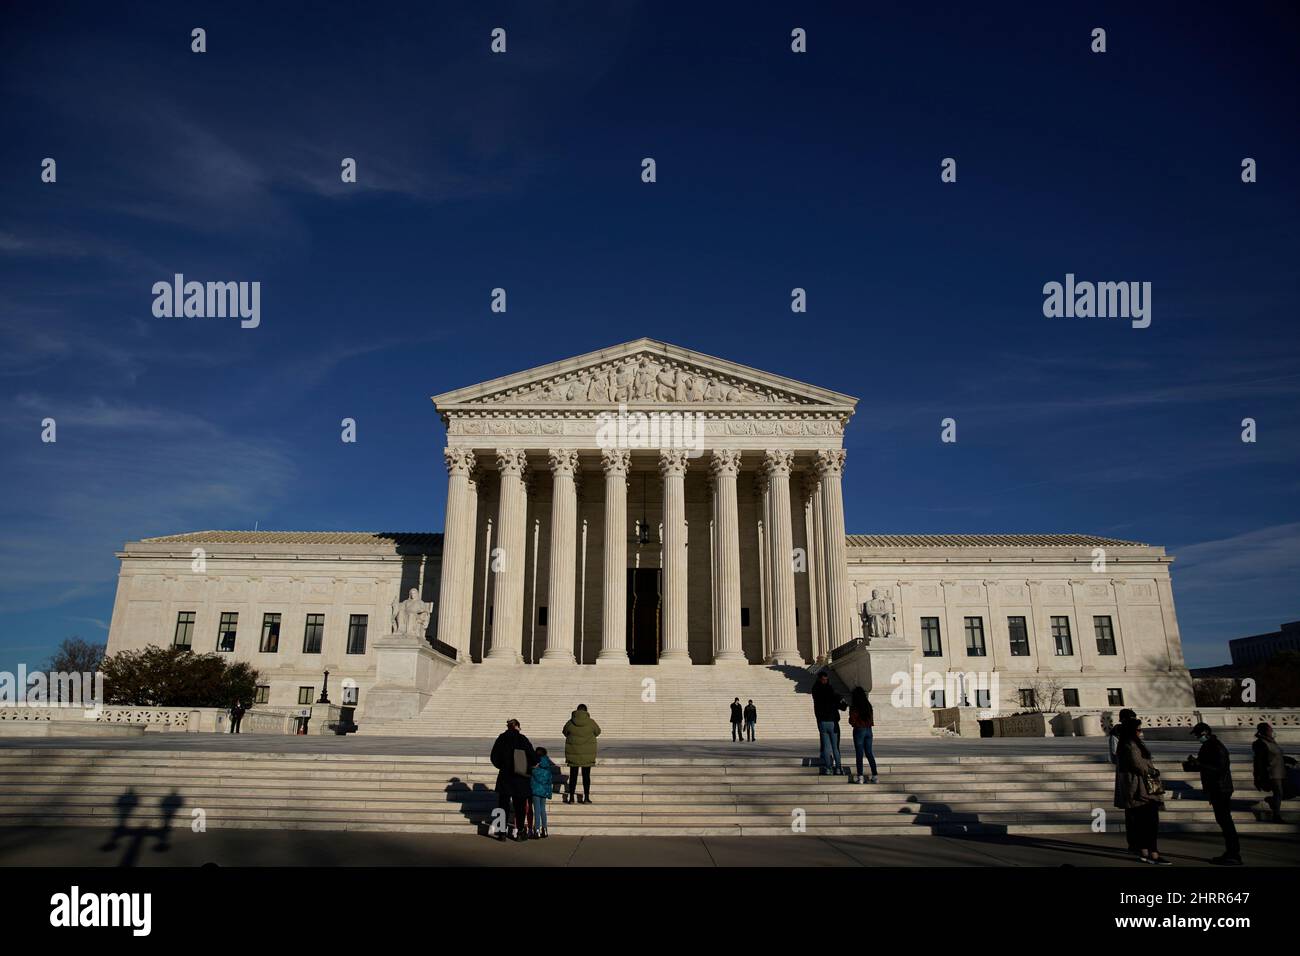 Washington DC, USA. 25th Feb, 2022. Photo taken on Feb. 25, 2022 shows the U.S. Supreme Court building in Washington, DC, the United States. U.S. President Joe Biden said on Friday that he's nominating Judge Ketanji Brown Jackson for the Supreme Court, setting in motion a process for the first African American woman to sit on its bench. Credit: Ting Shen/Xinhua/Alamy Live News Stock Photo